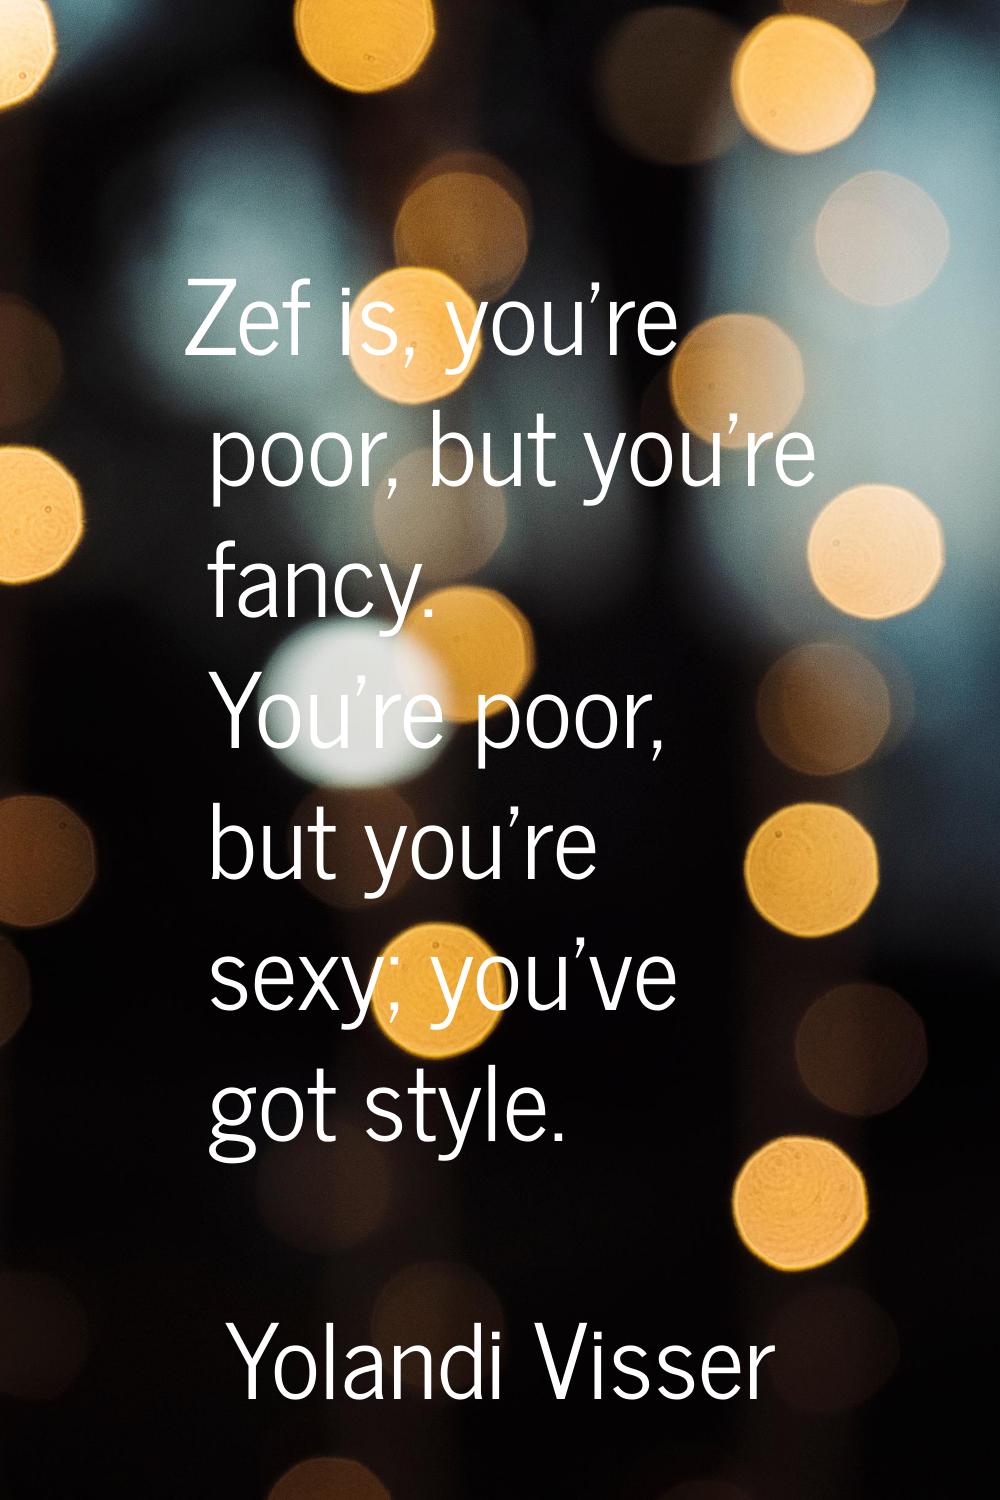 Zef is, you're poor, but you're fancy. You're poor, but you're sexy; you've got style.